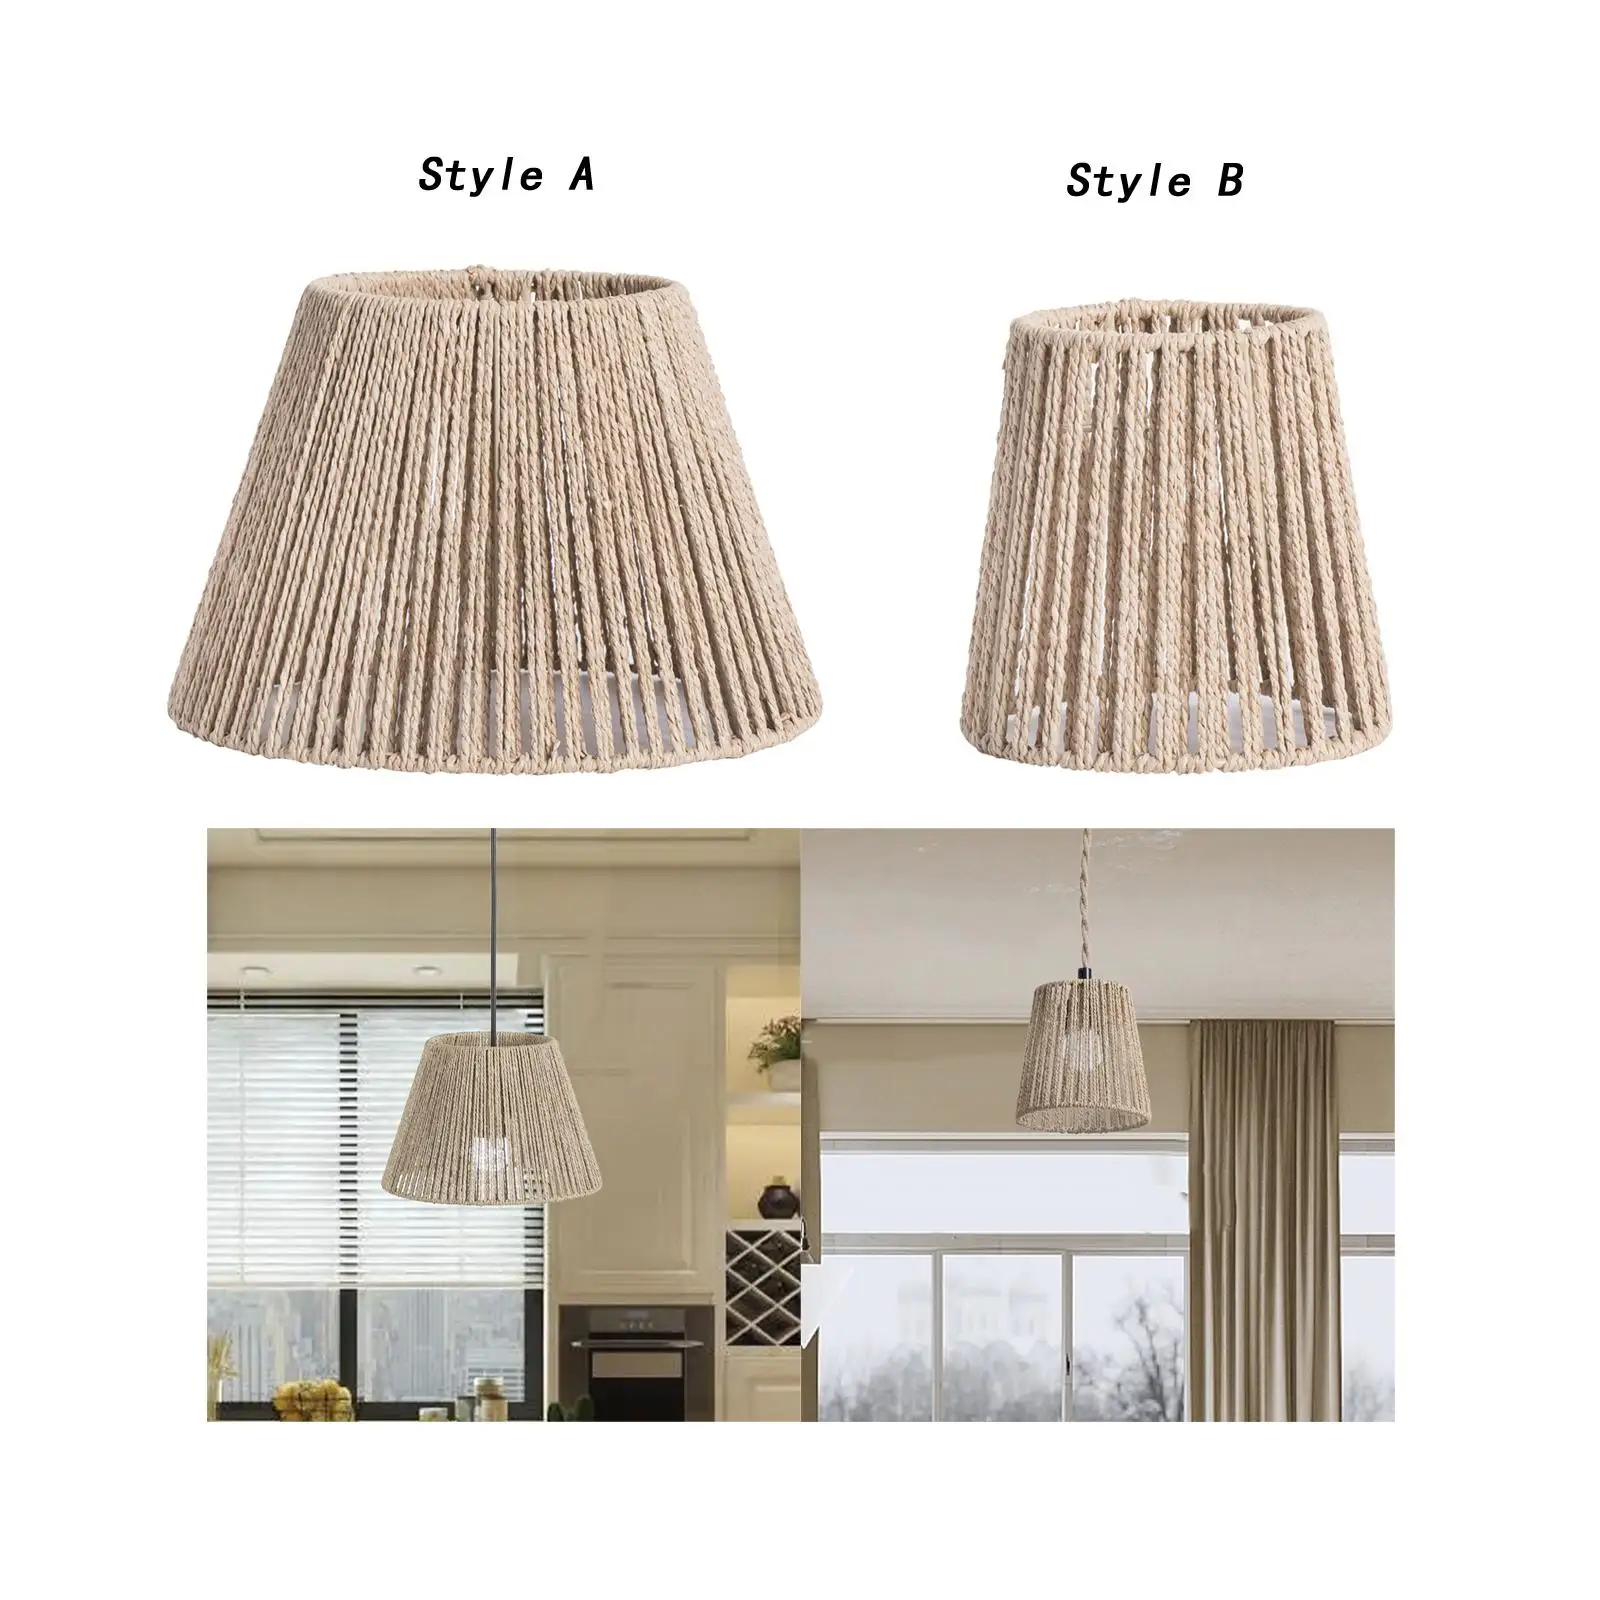 Woven Lampshade Pendant Light Fixture Handmade Rope Weave Retro Chandelier Light Cover for Bedroom Dining Room Kitchen Home Cafe